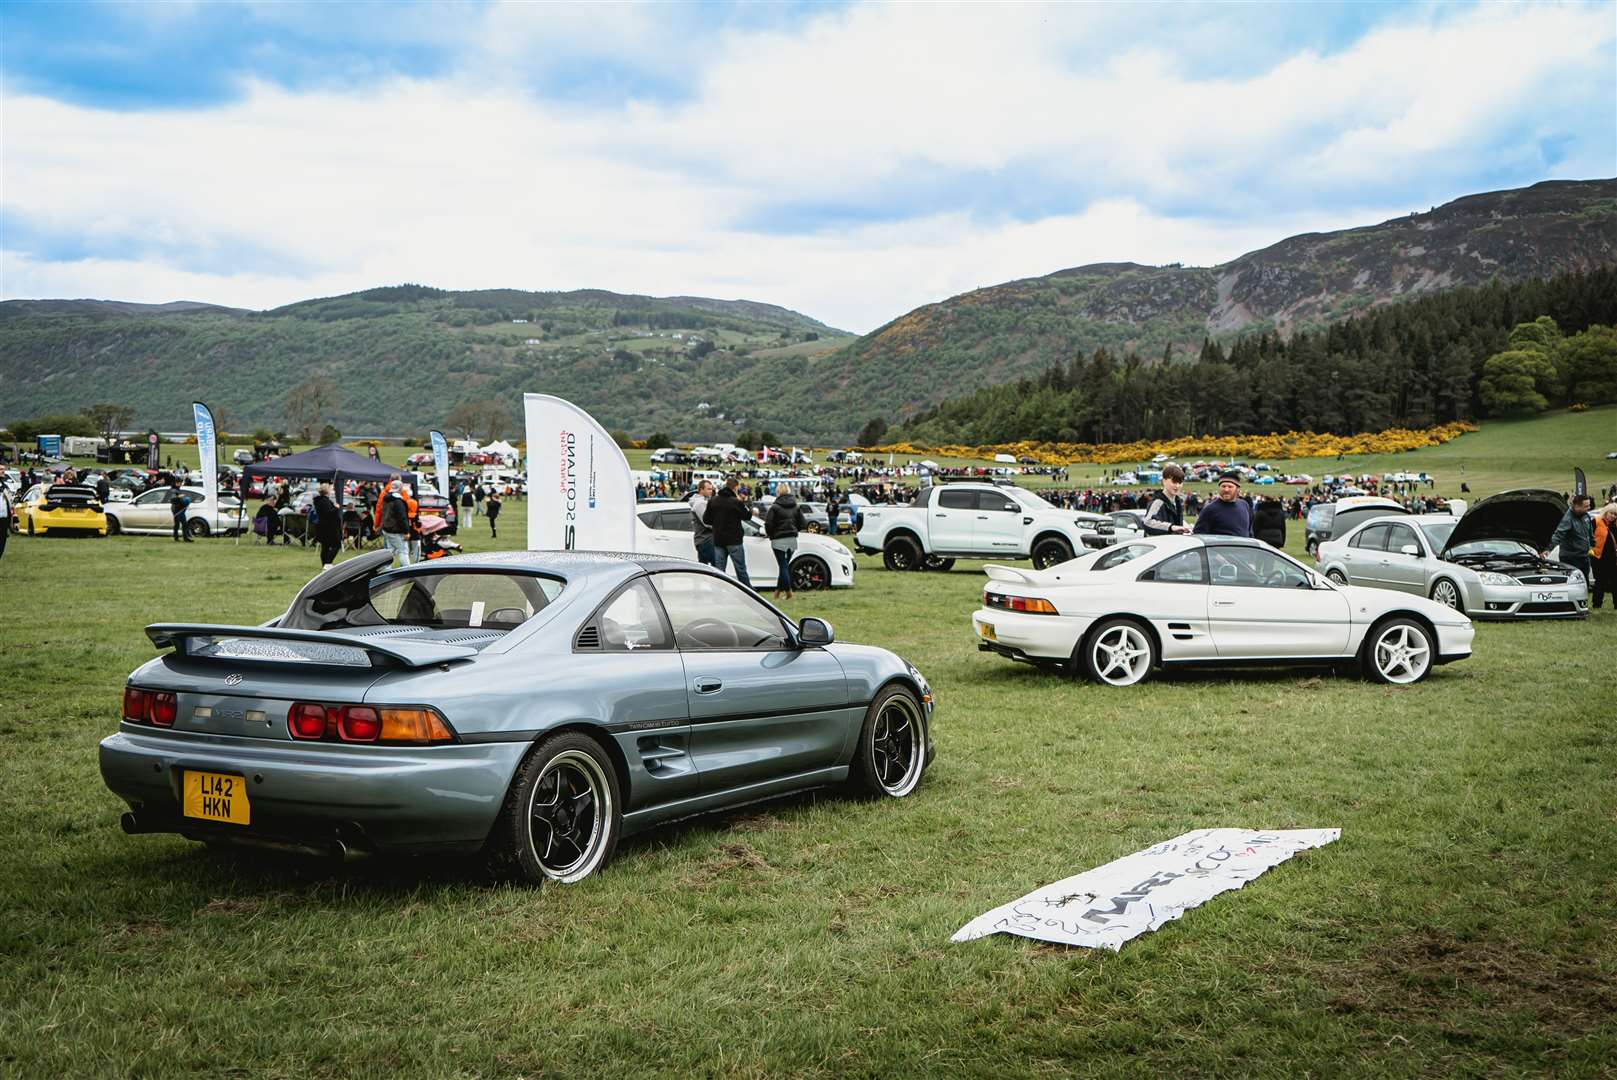 Scenes from the Inverness Car Show.